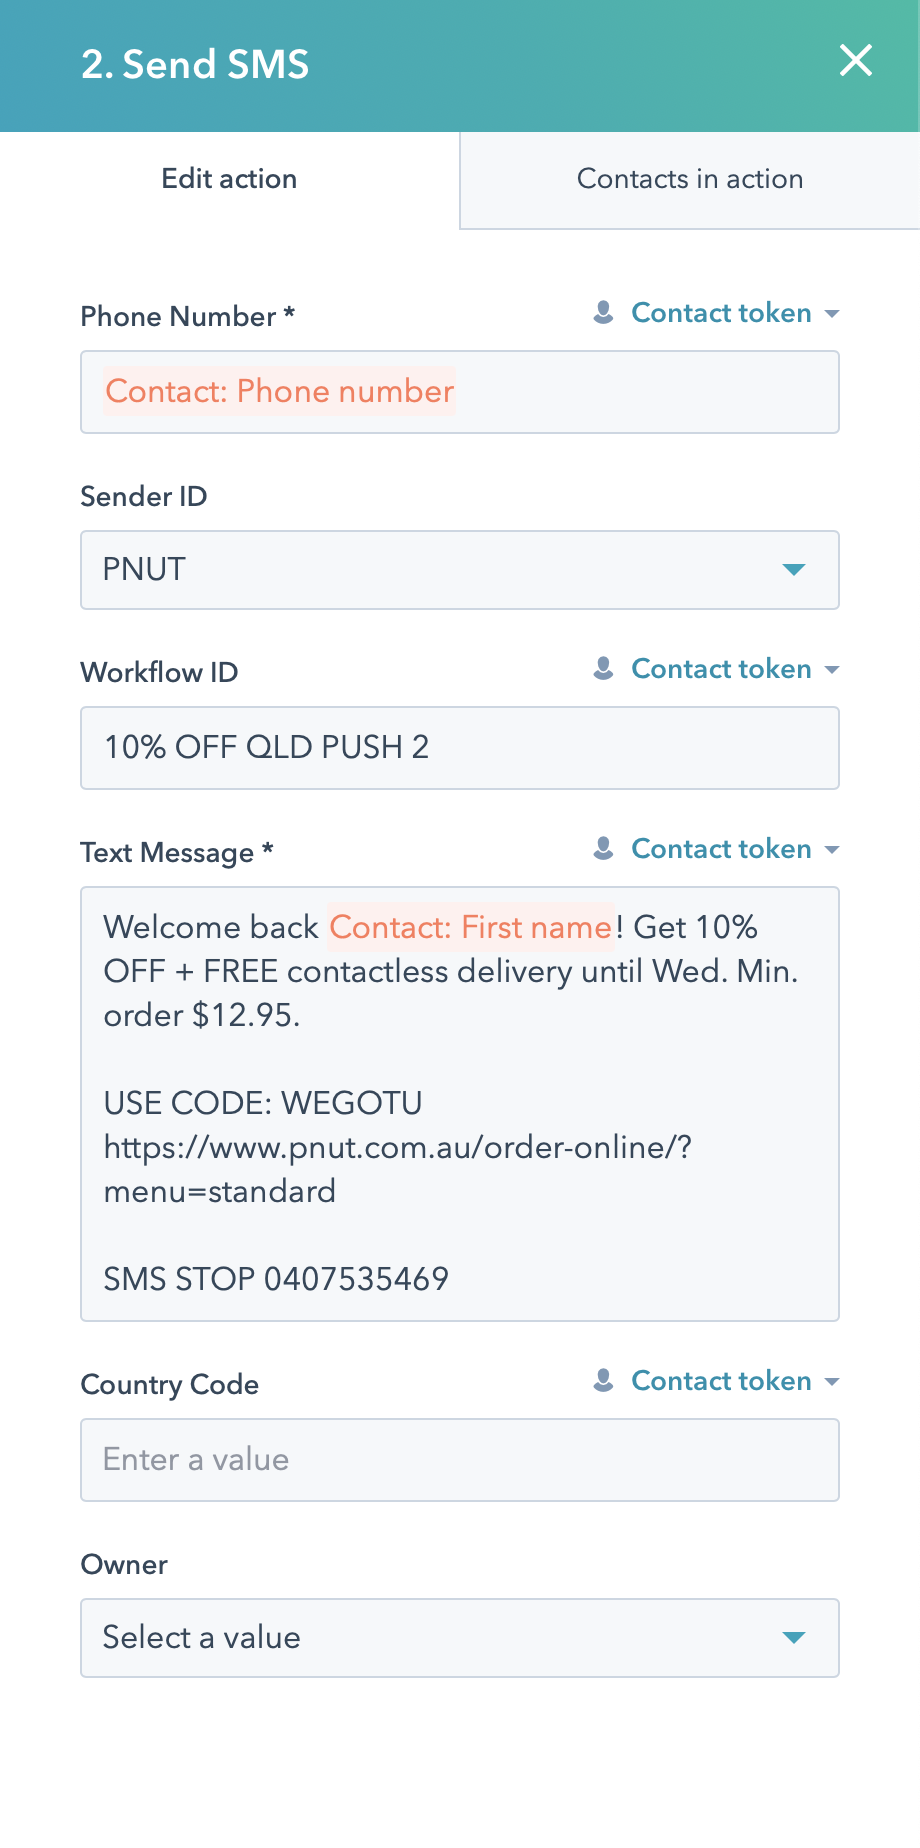 HubSpot welcome back SMS creation